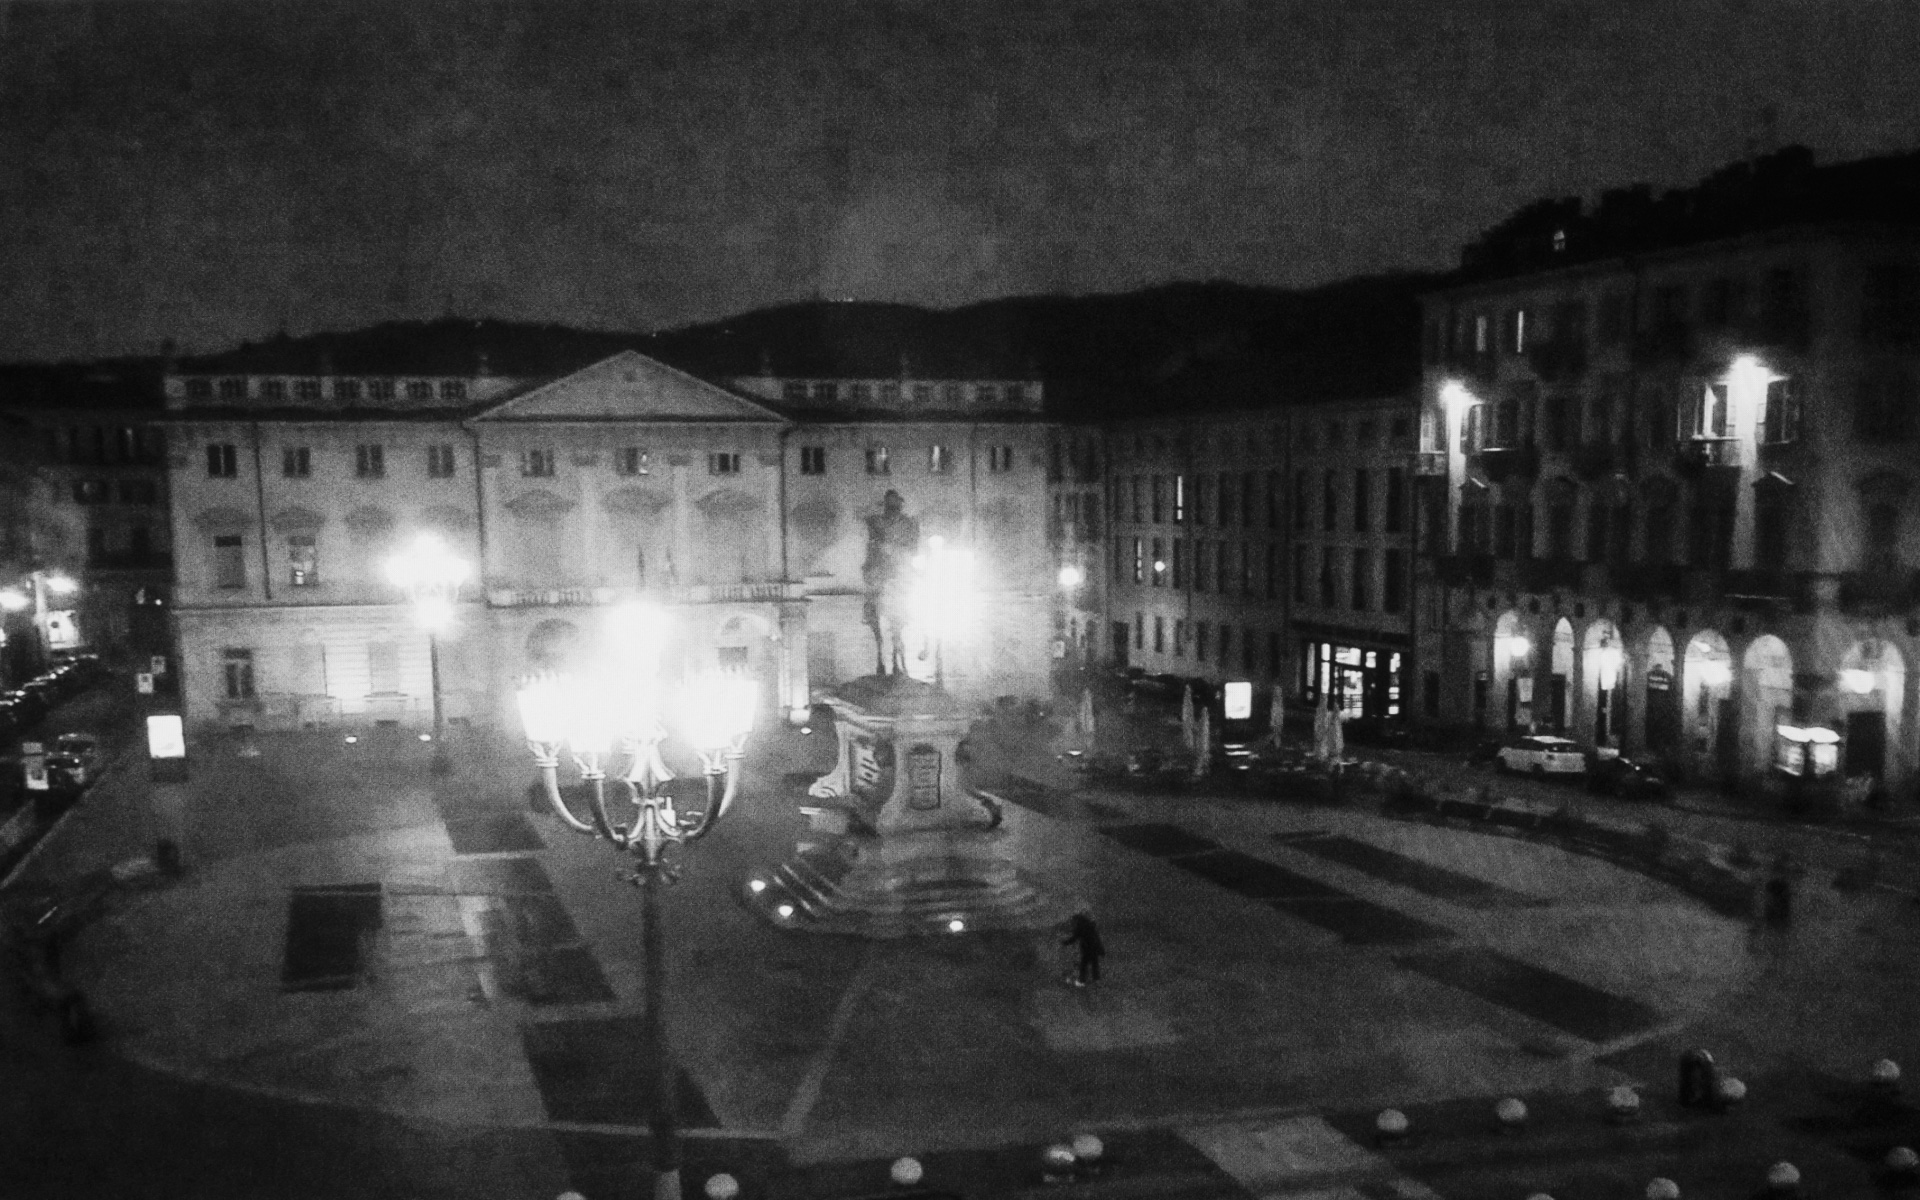 Torino, Giambattista Bodoni square - Men collecting poop of his dog after an evening stroll on Bodoni Square of Torino, Italy. March 26. 2020.